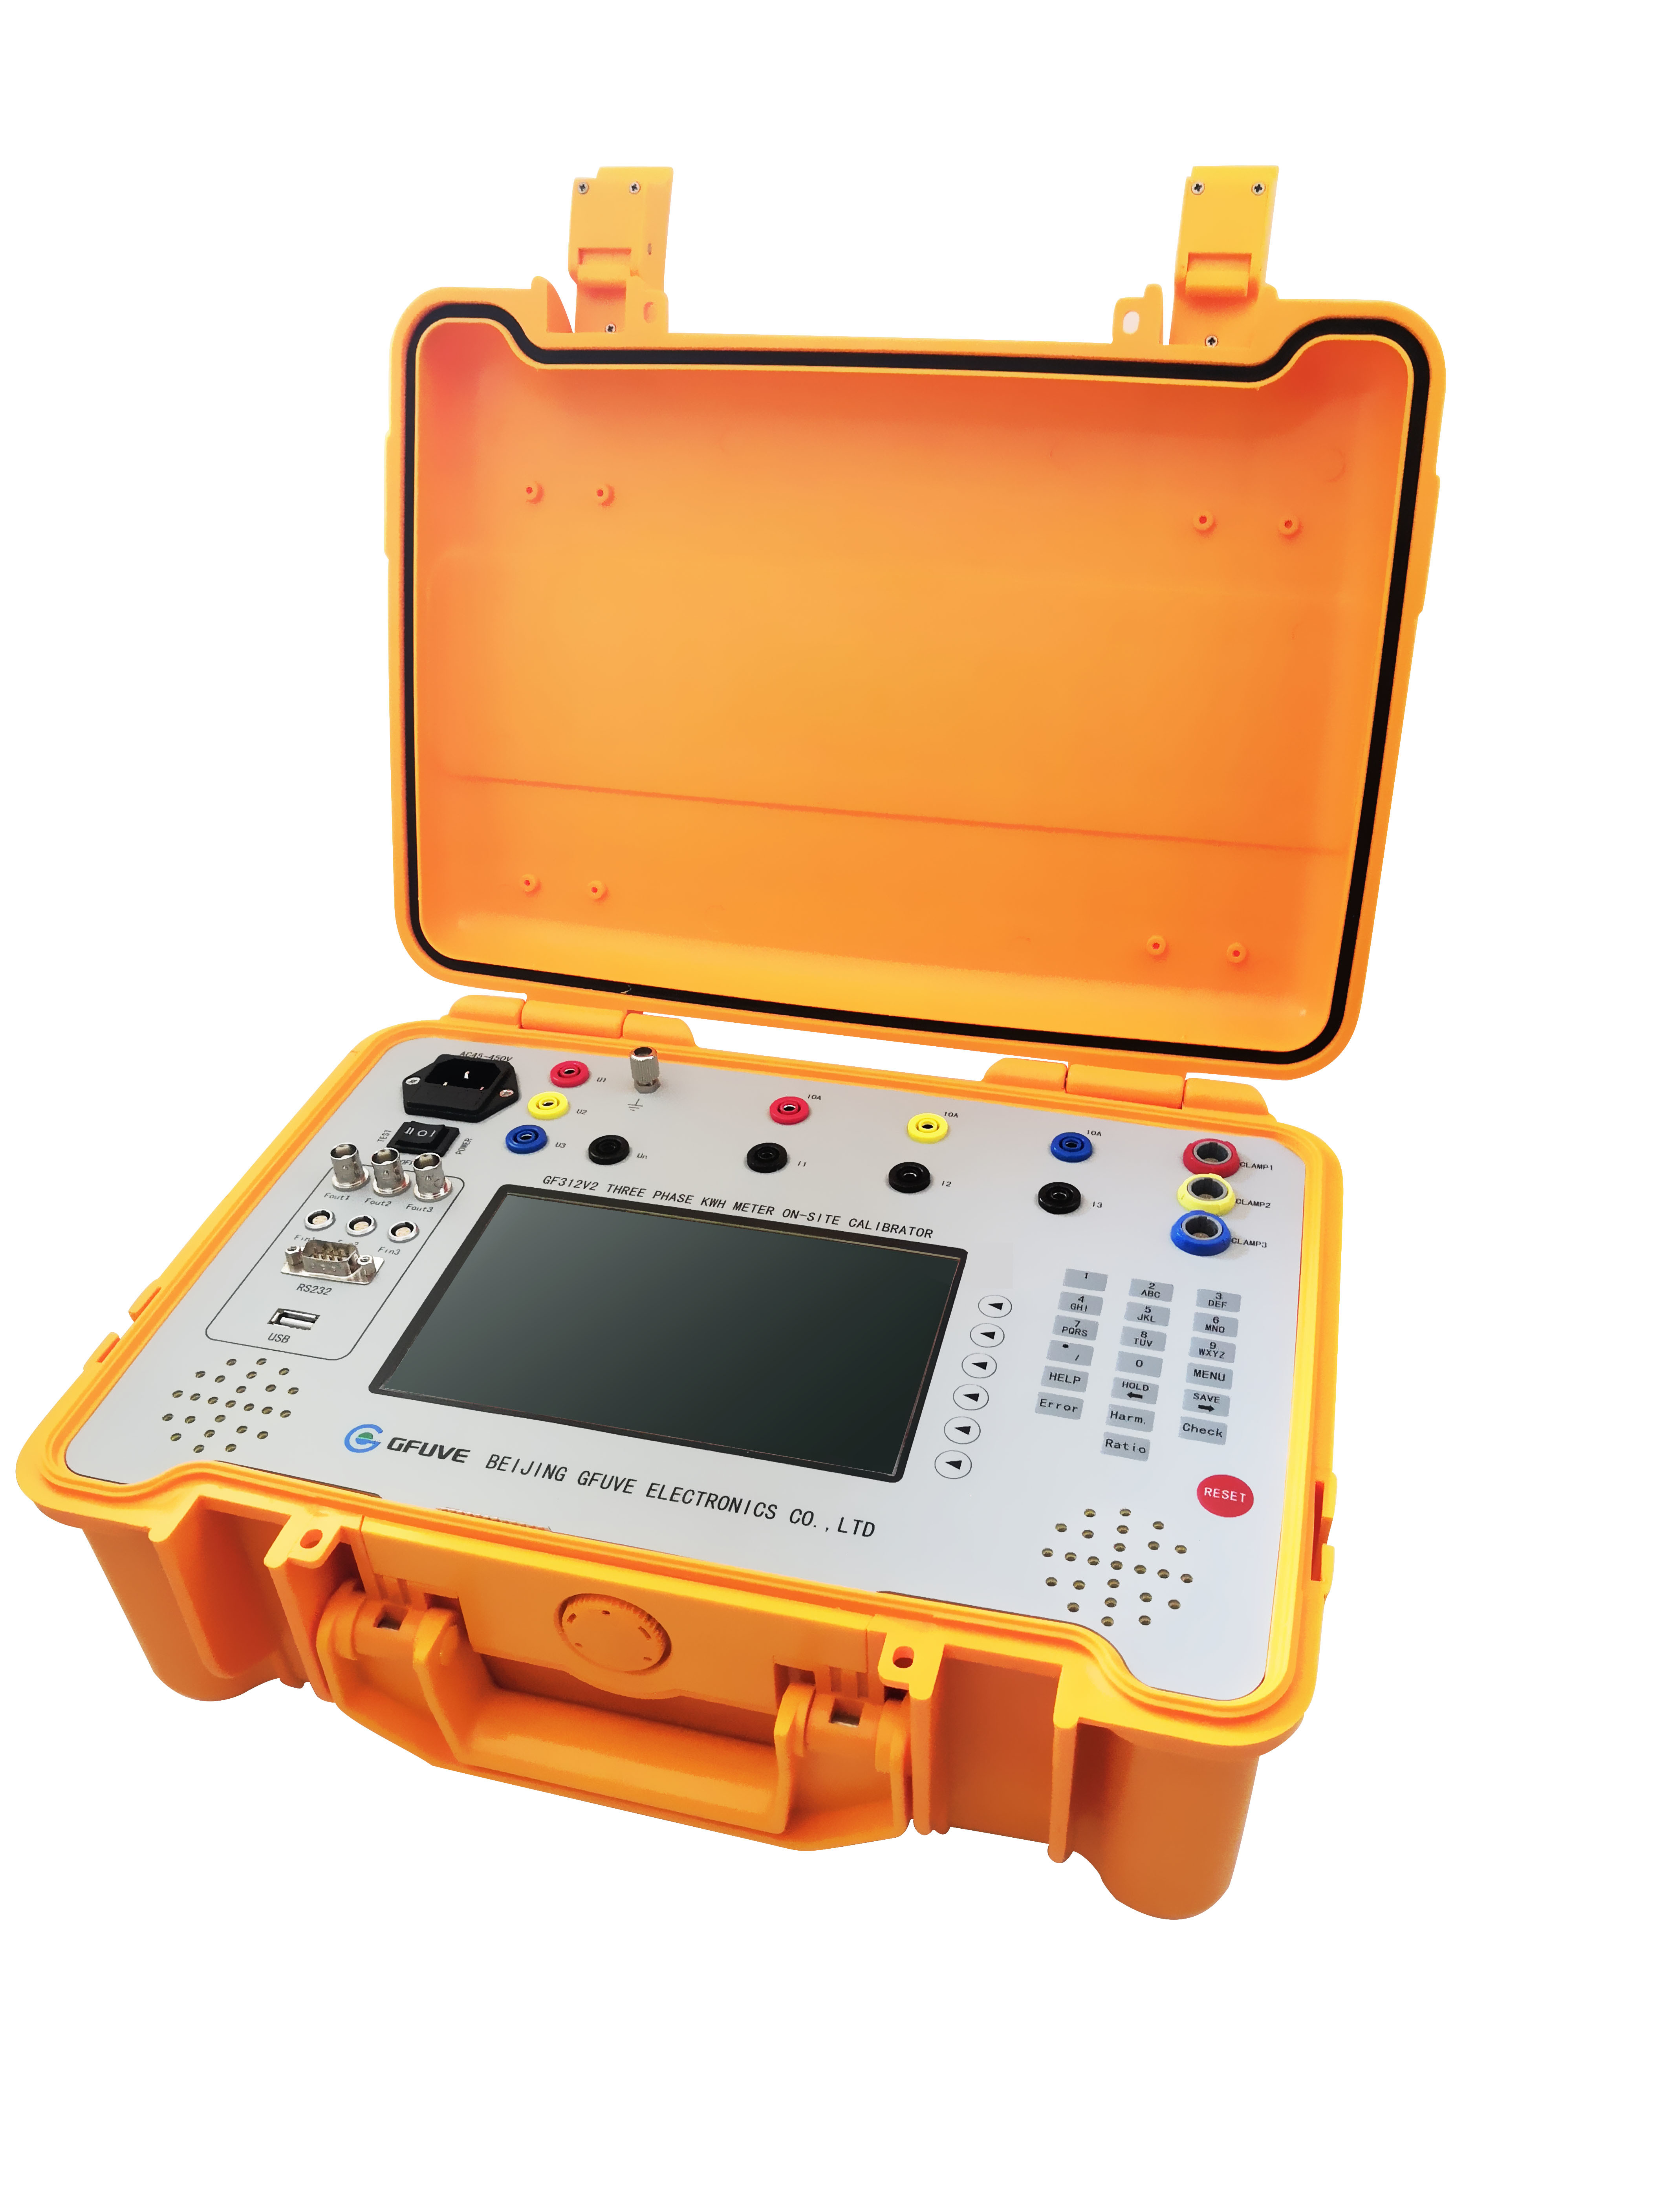 High Precision Electrical Test Equipment Calibration For 0.02% Three Phase Portable Reference Meter